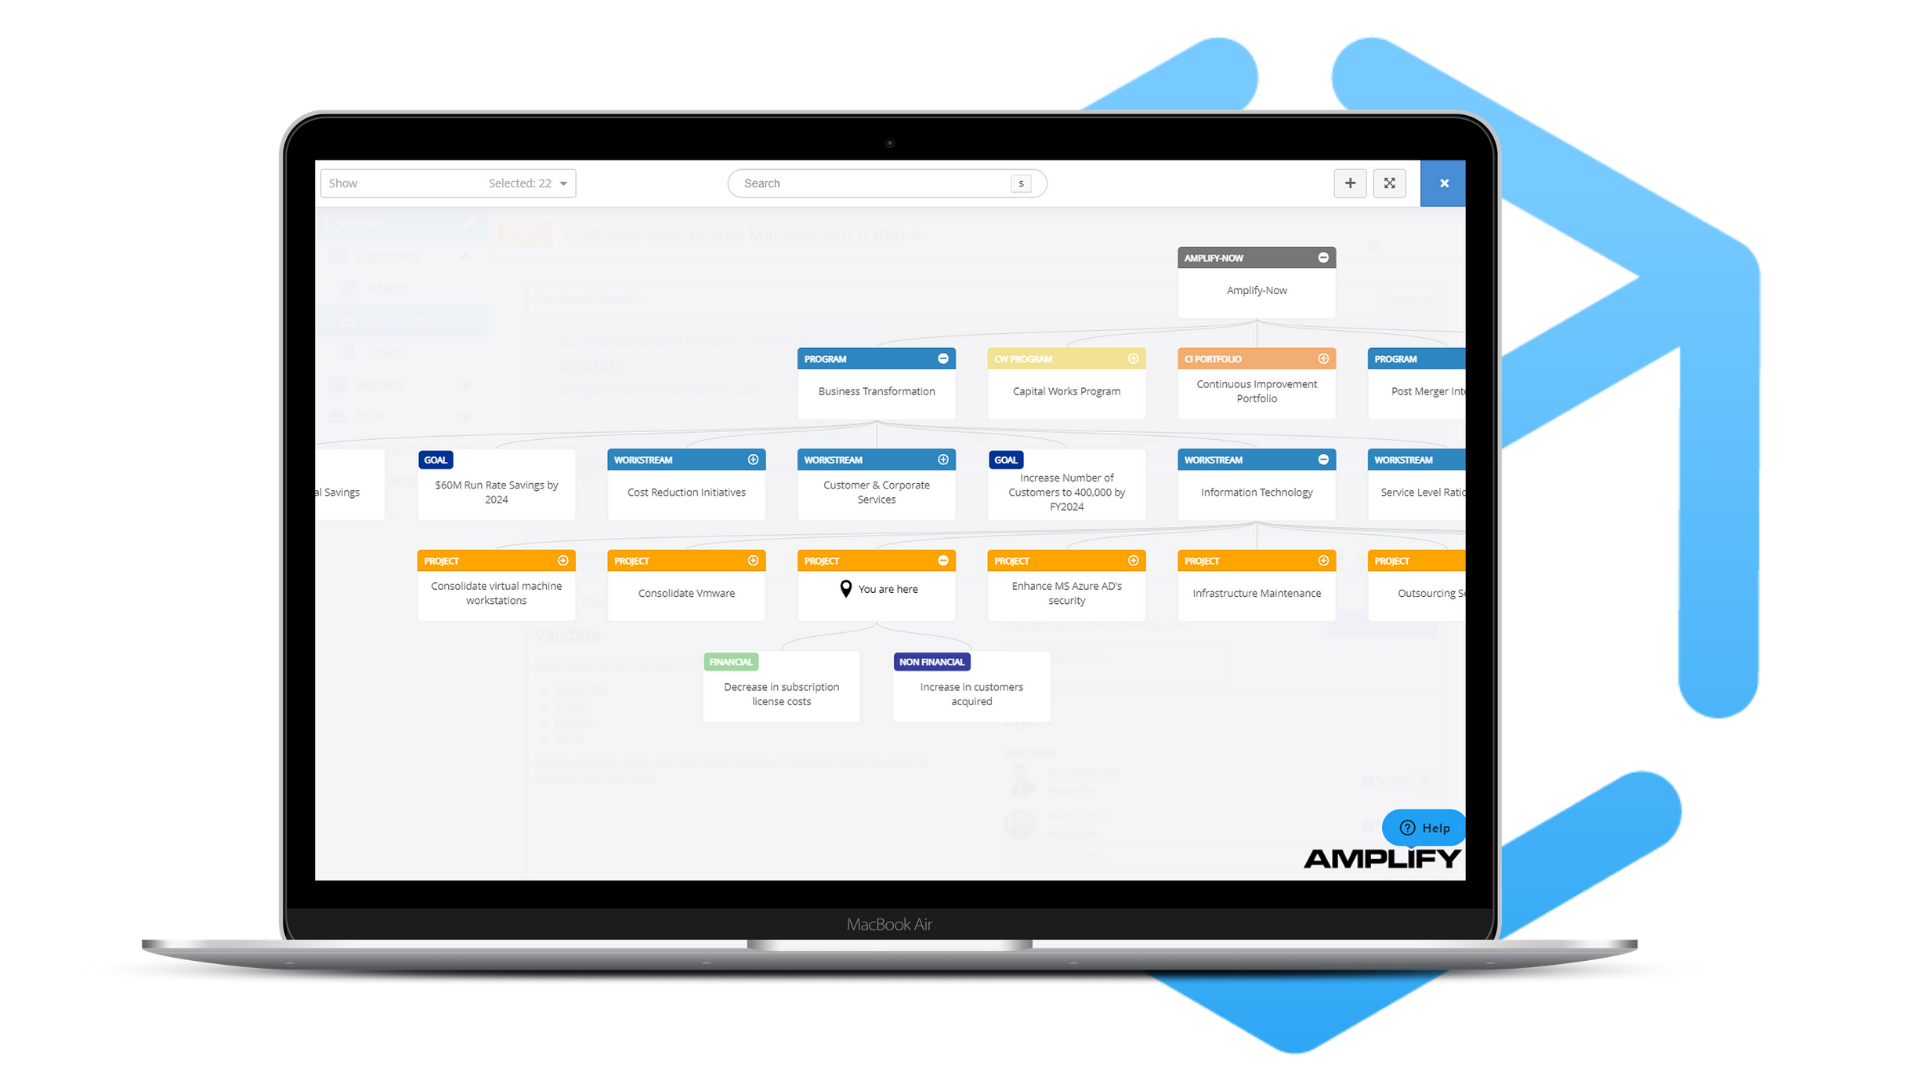 Amplify's program hierarchy allows initiative views to align with program governance structures - helping provide visibility and accountability.